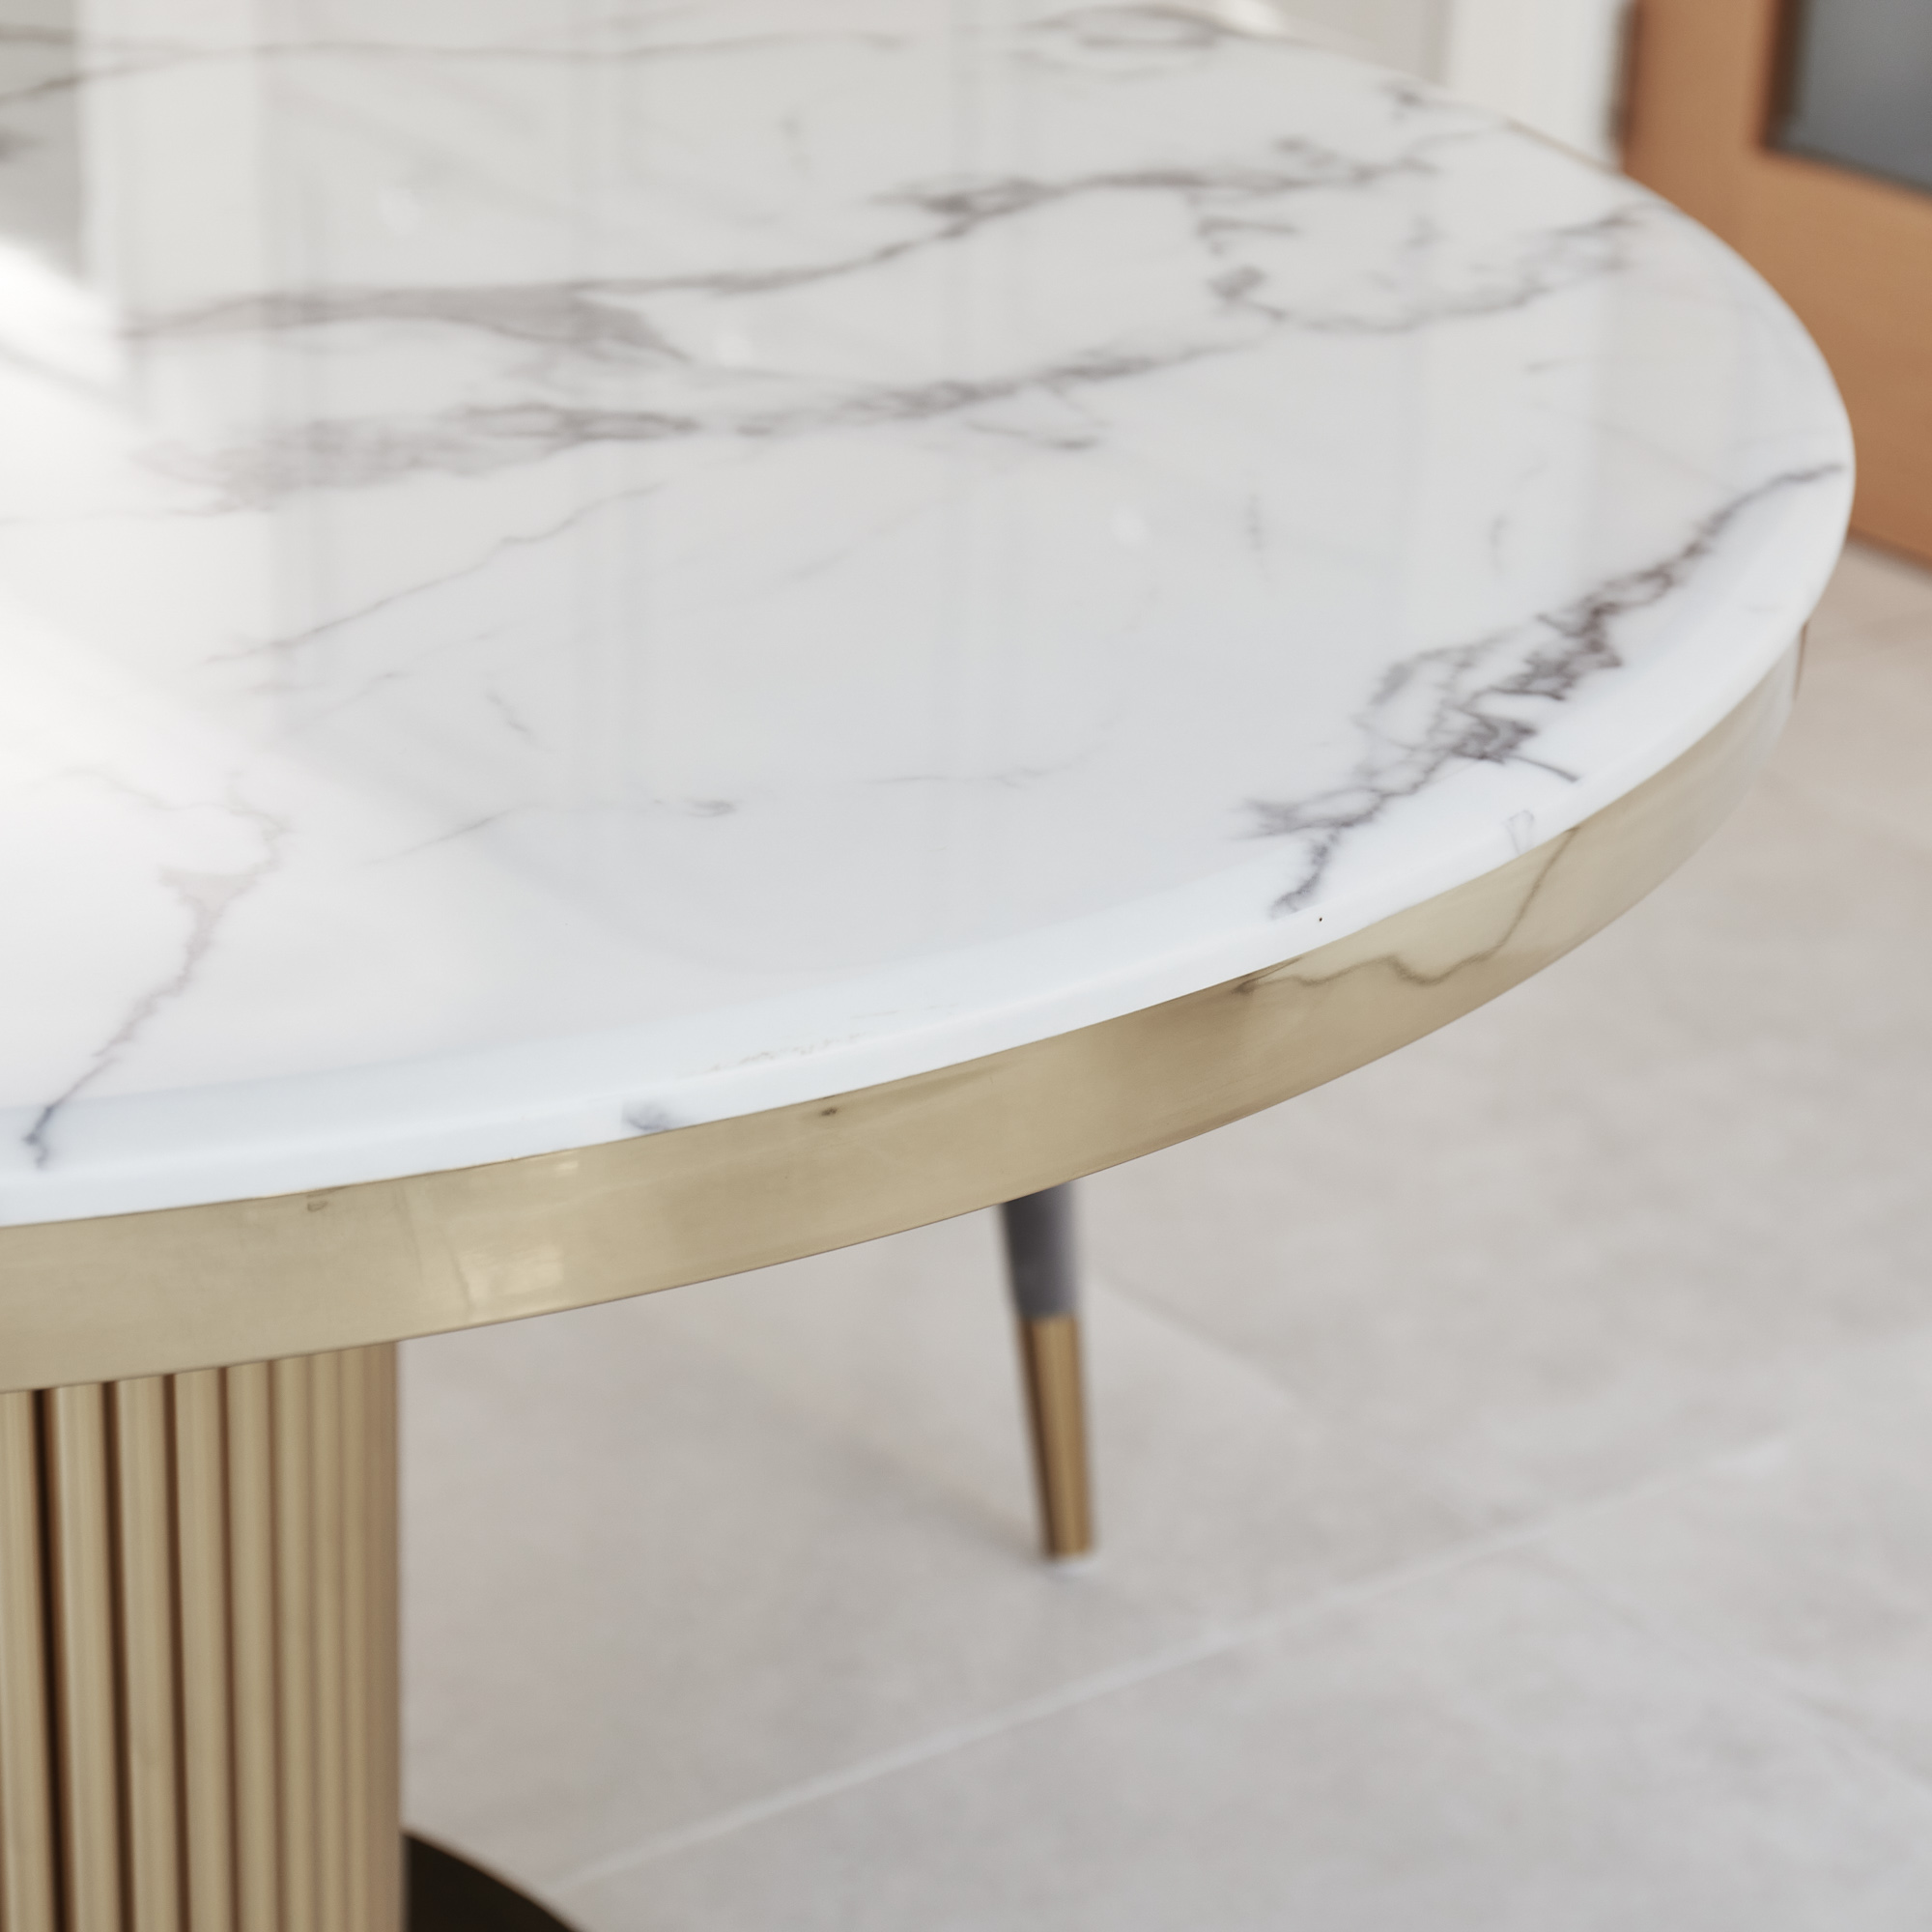 1.3M Circular Gold Pedestal Stainless Steel Dining Table with White Marble Top